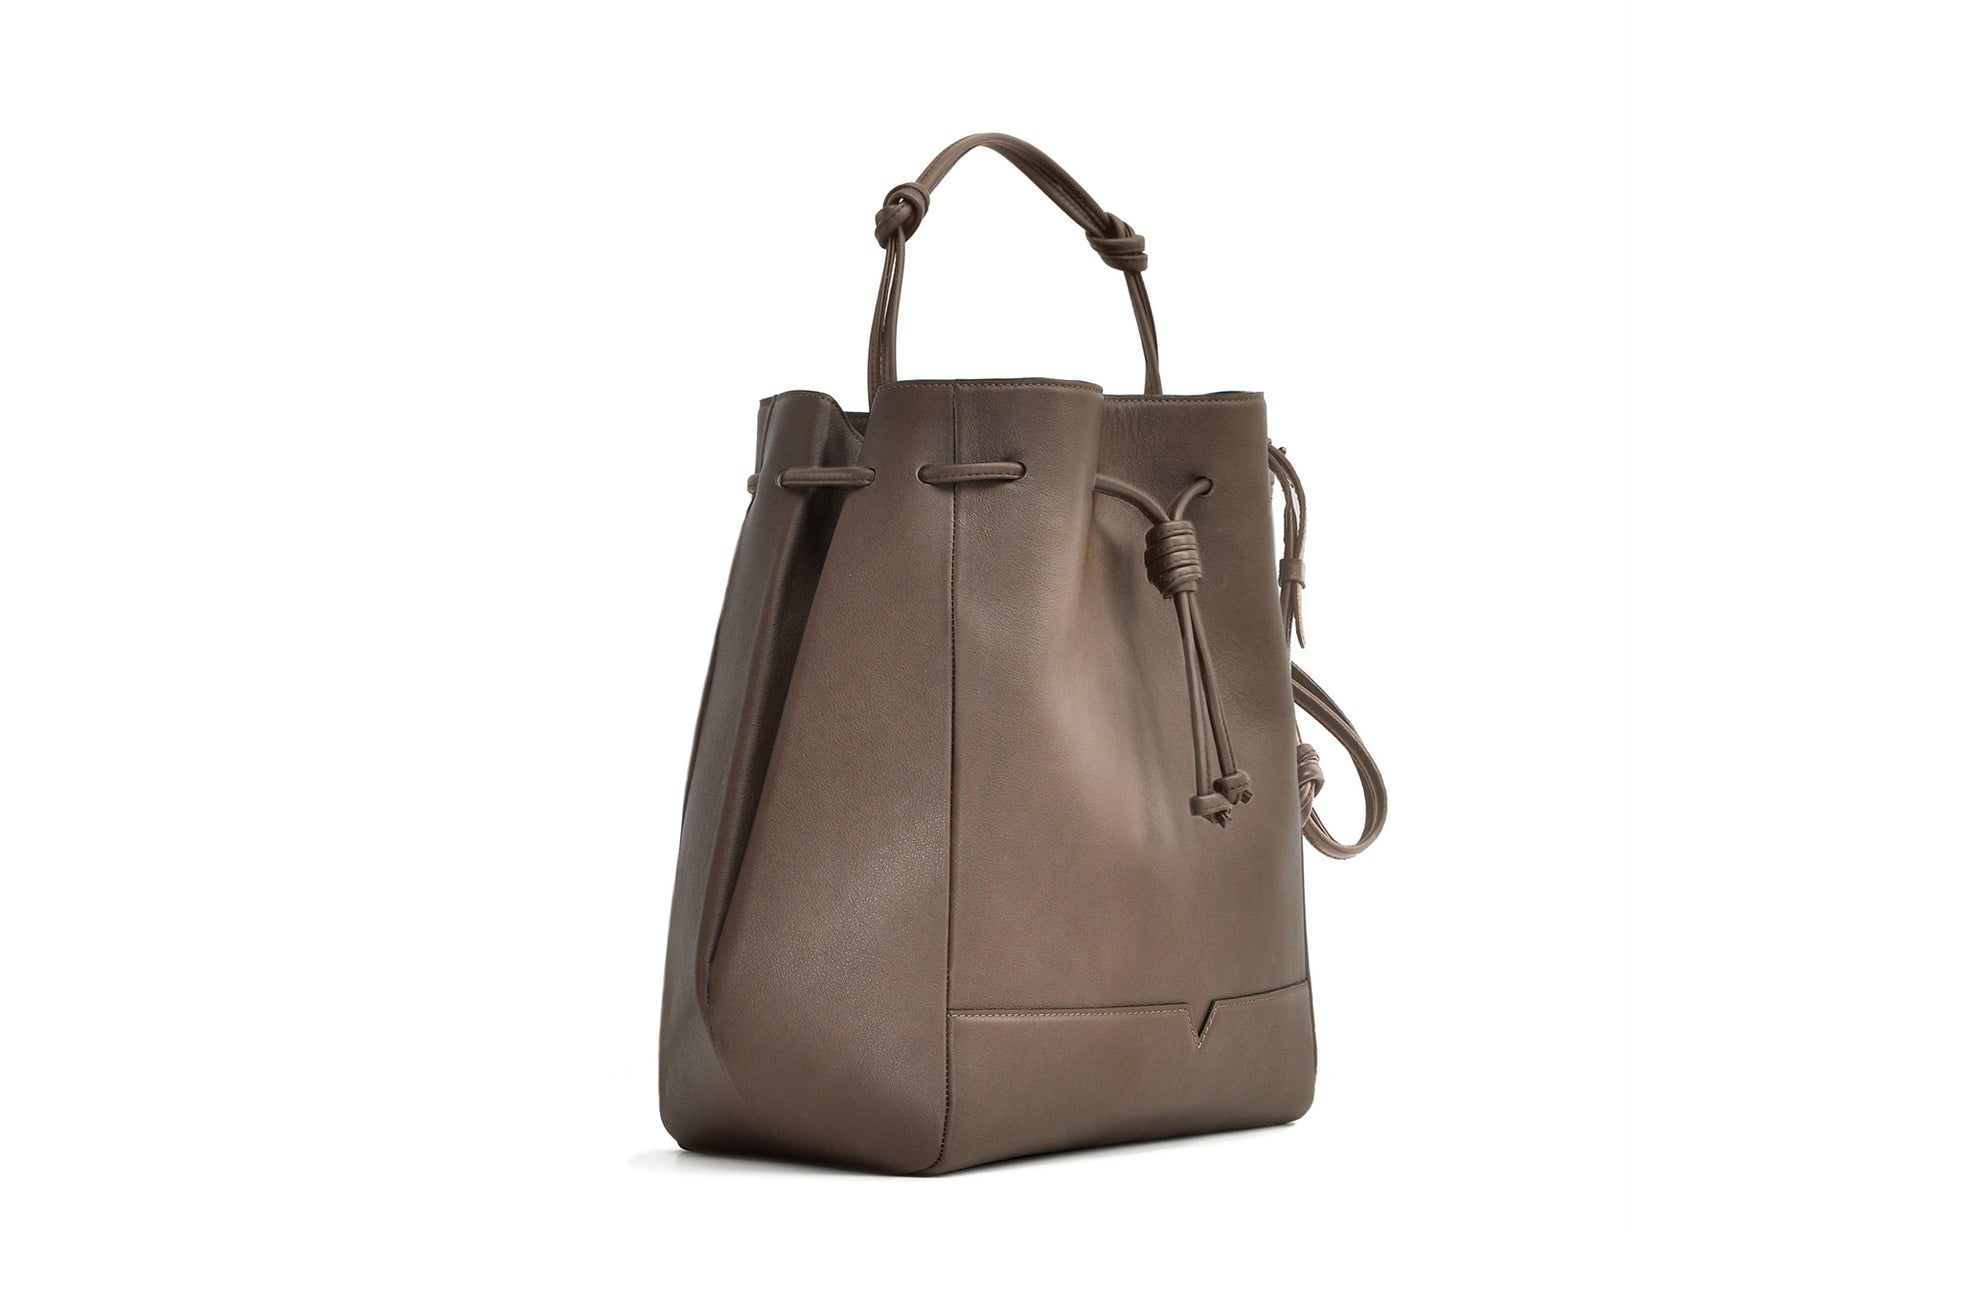 The Large Bucket Backpack - Sample Sale in Technik in Taupe image 